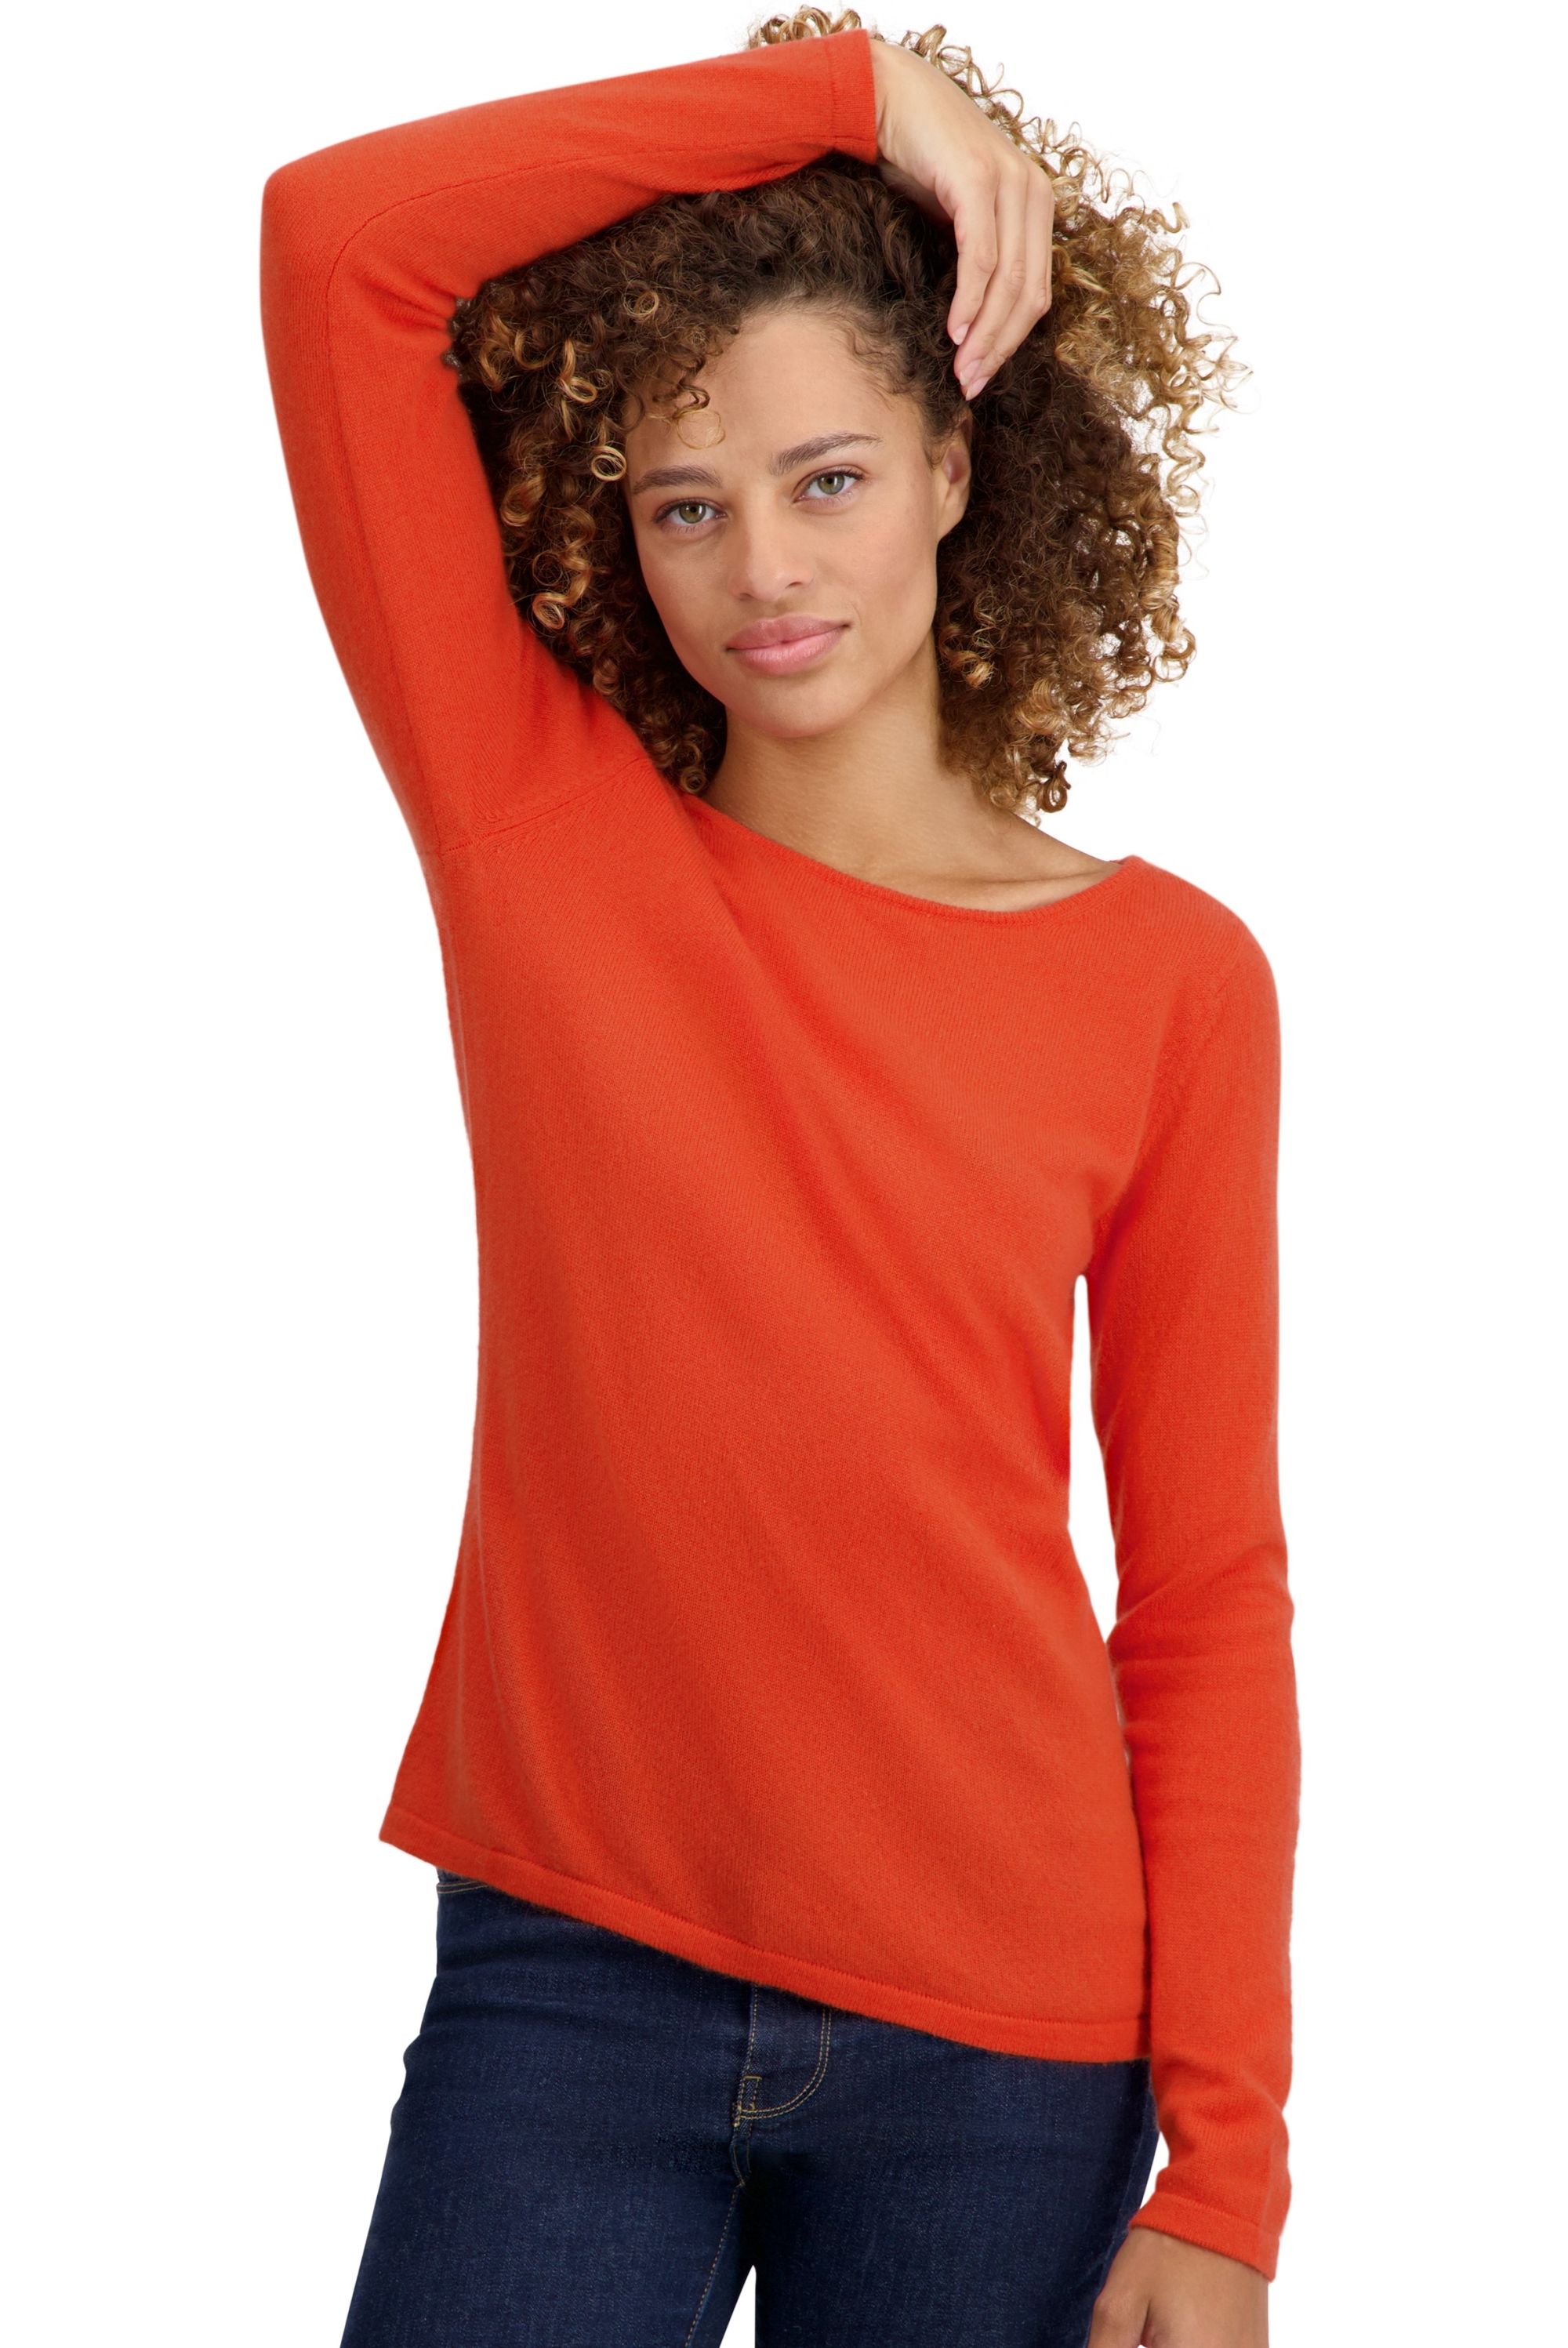 Cashmere ladies basic sweaters at low prices tennessy first satsuma 2xl